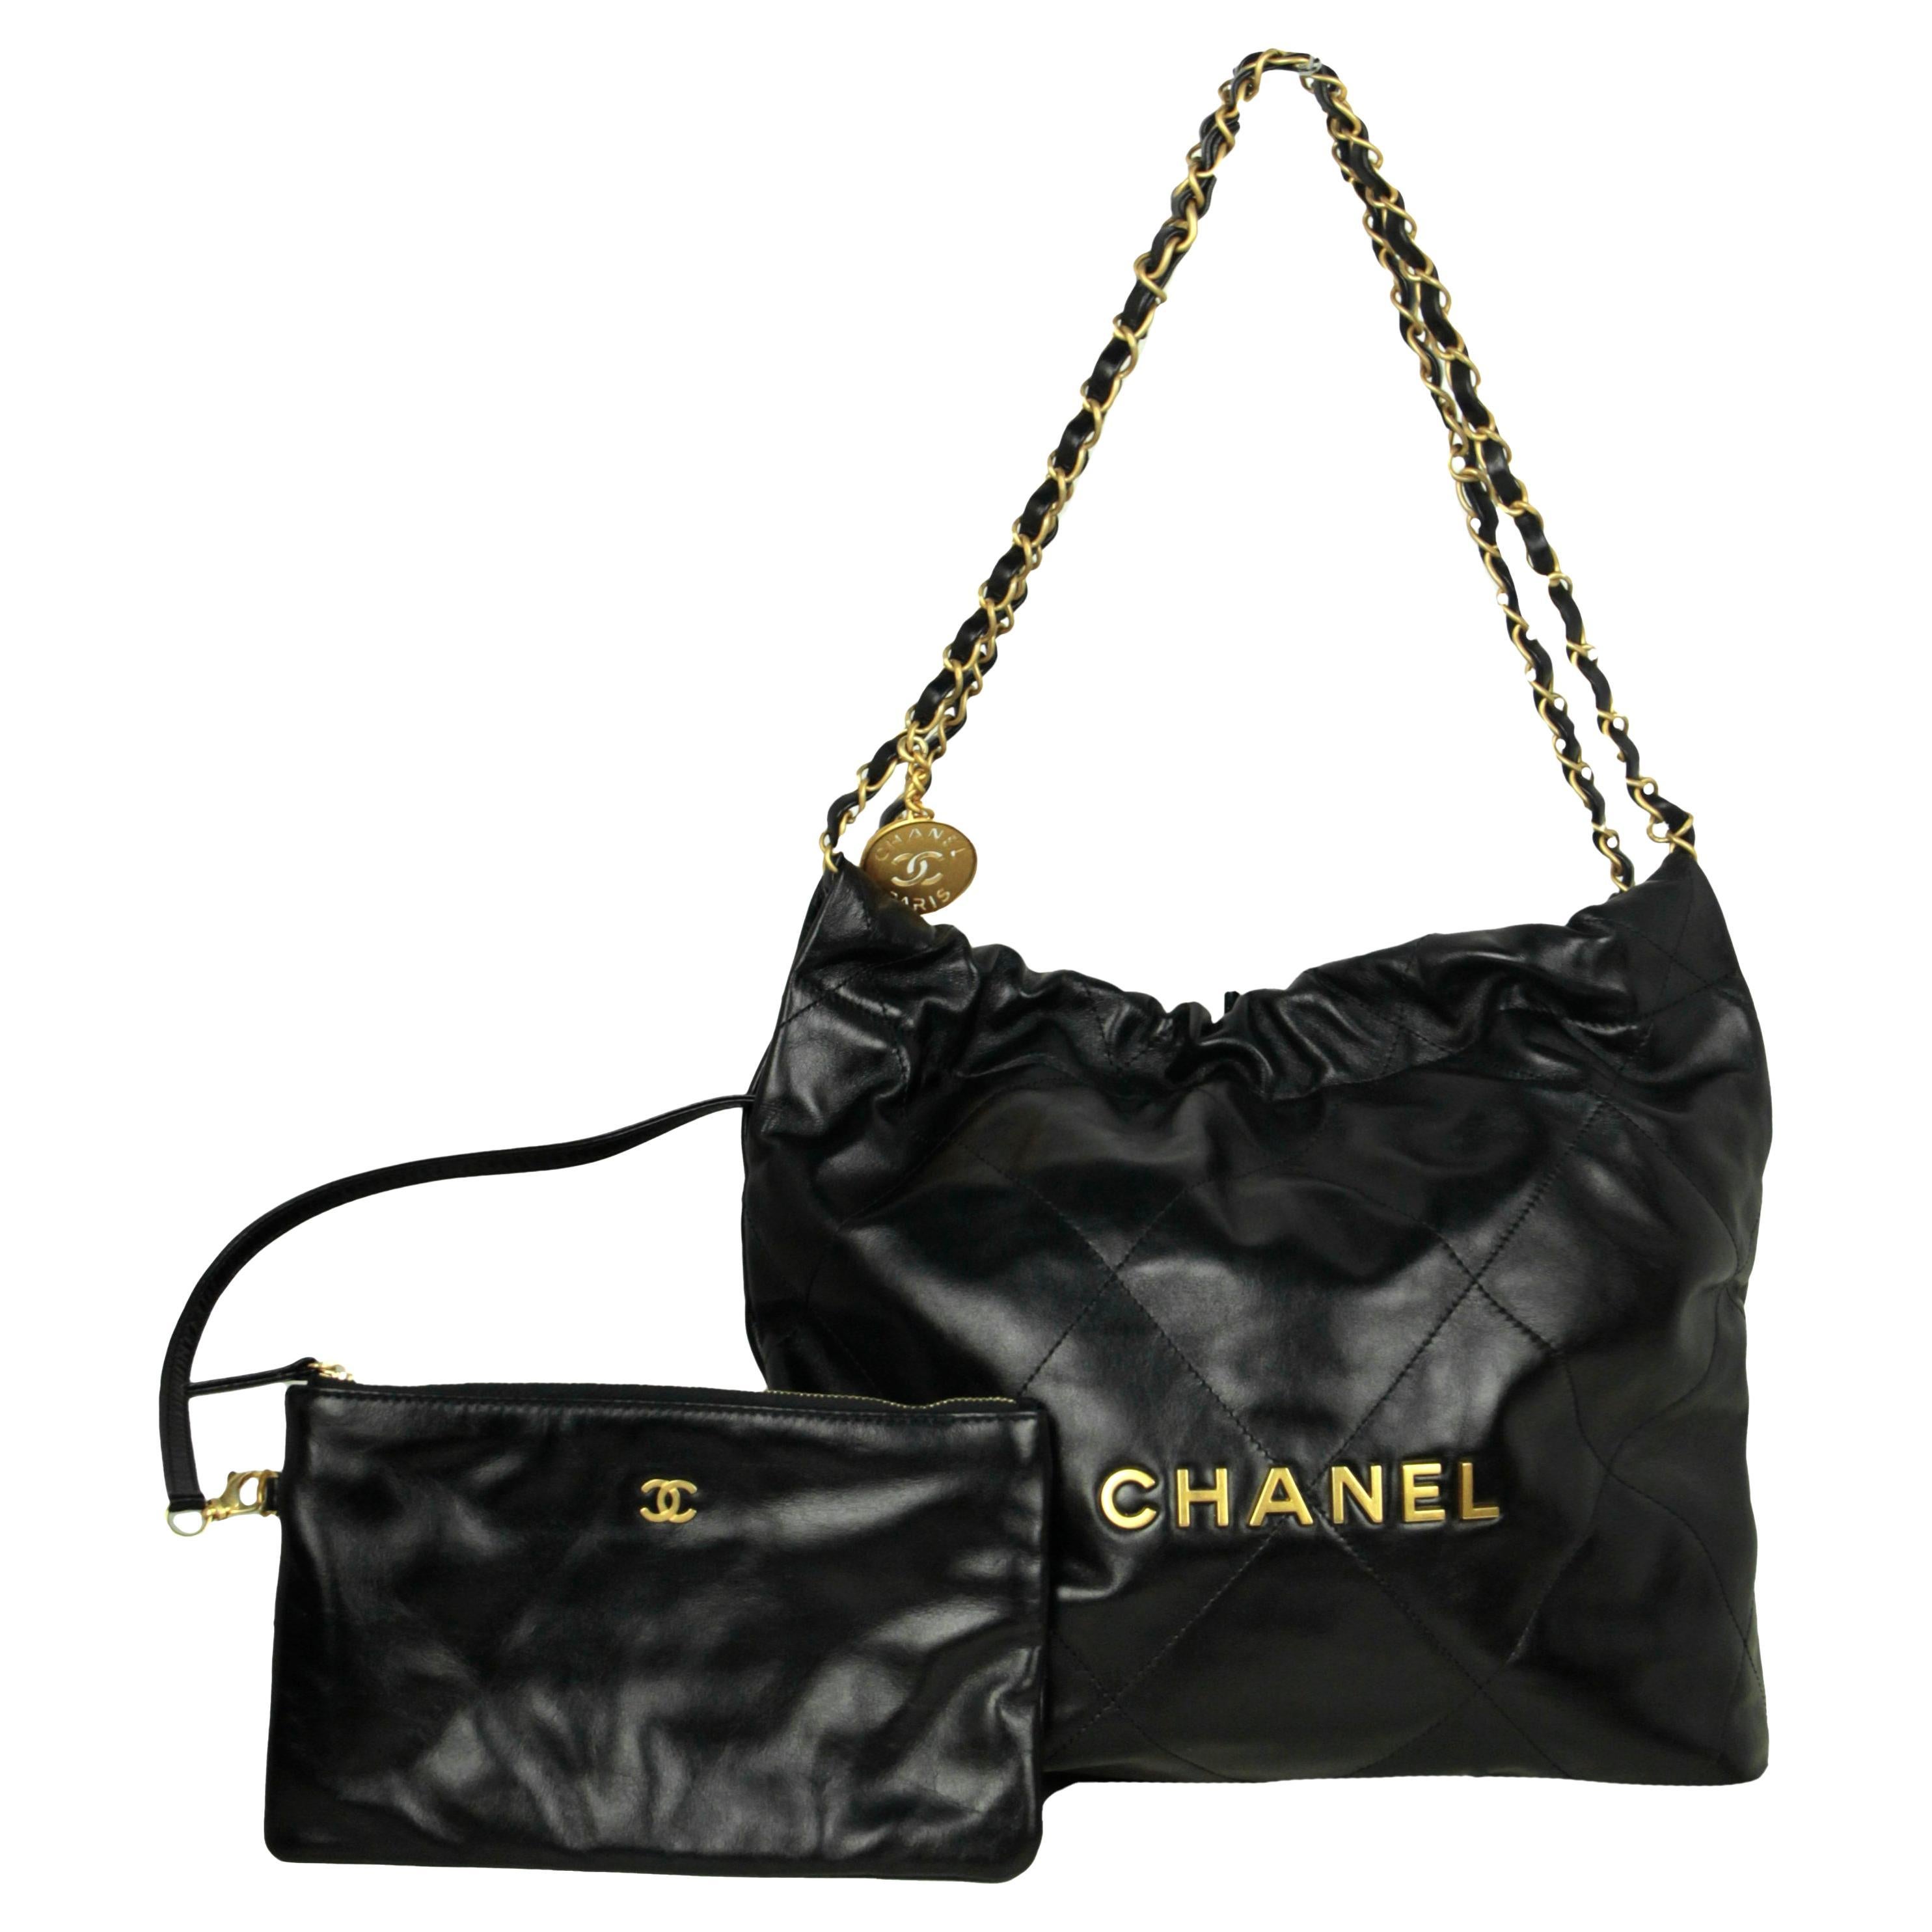 Chanel Black Shiny Calfskin Quilted Small Chanel 22 Tote Bag